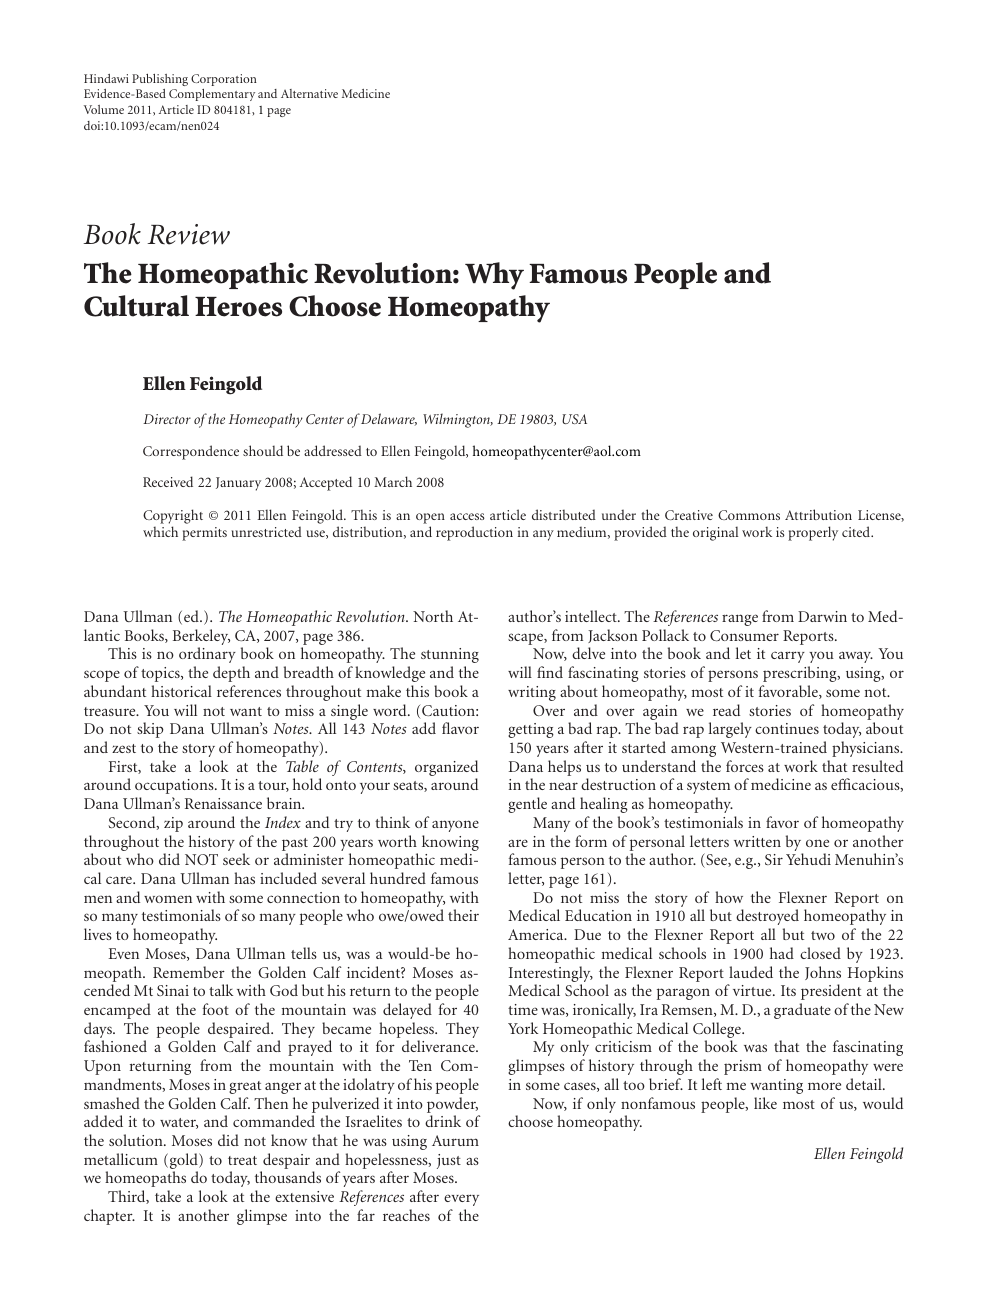 Person research famous paper on Famous Person